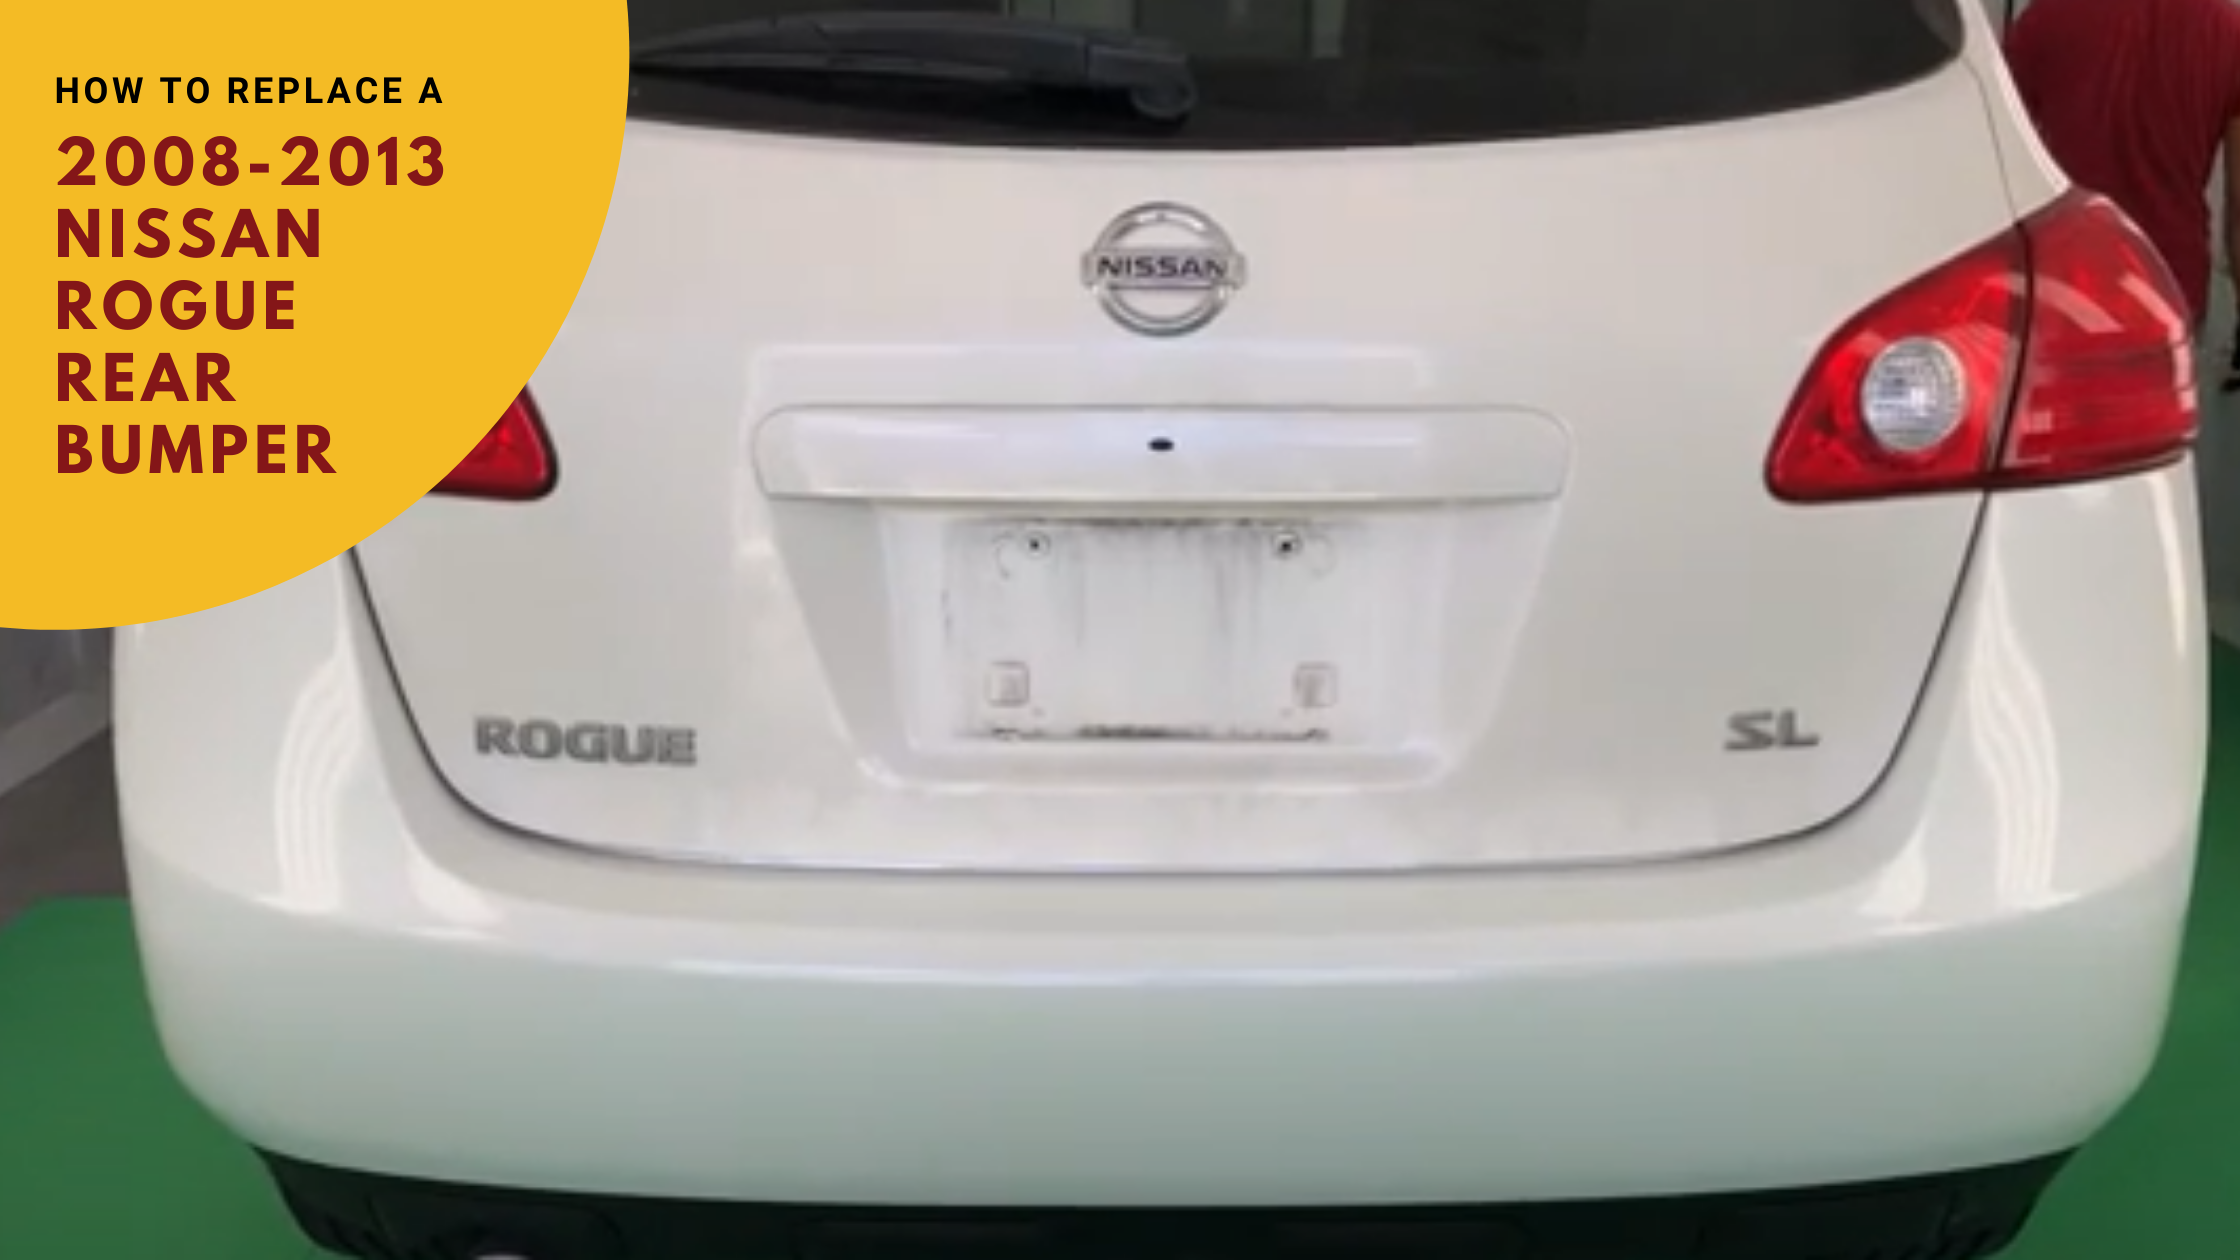 How to Replace 2008-2013 Nissan Rogue Rear Bumper